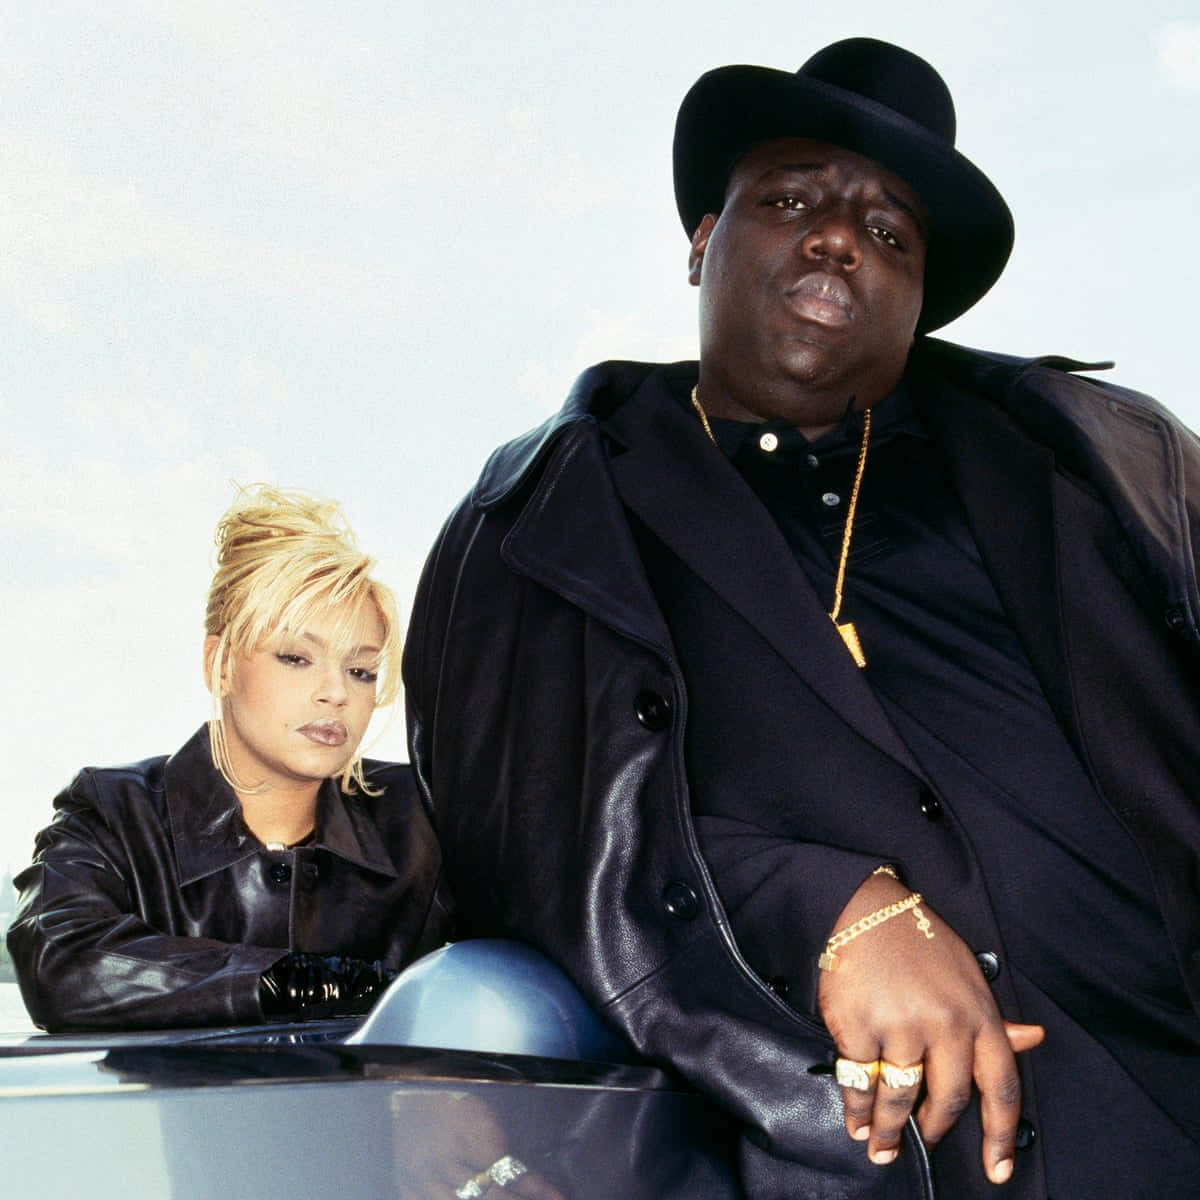 The Notorious B.I.G.&Faith Evans: An Iconic Hip-Hop Duo Wallpaper